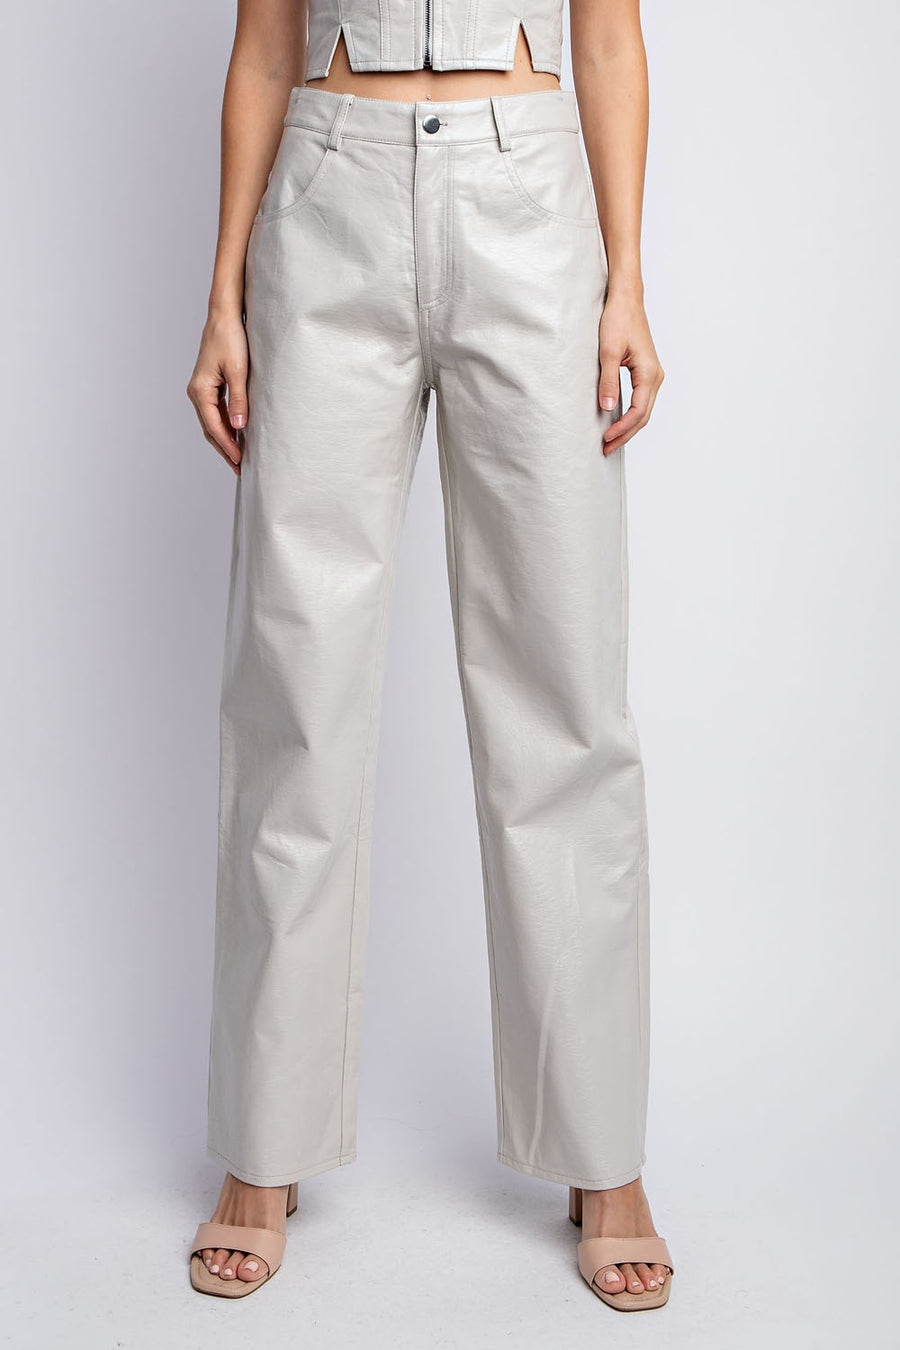 Leather straight leg pants in the color bone. 